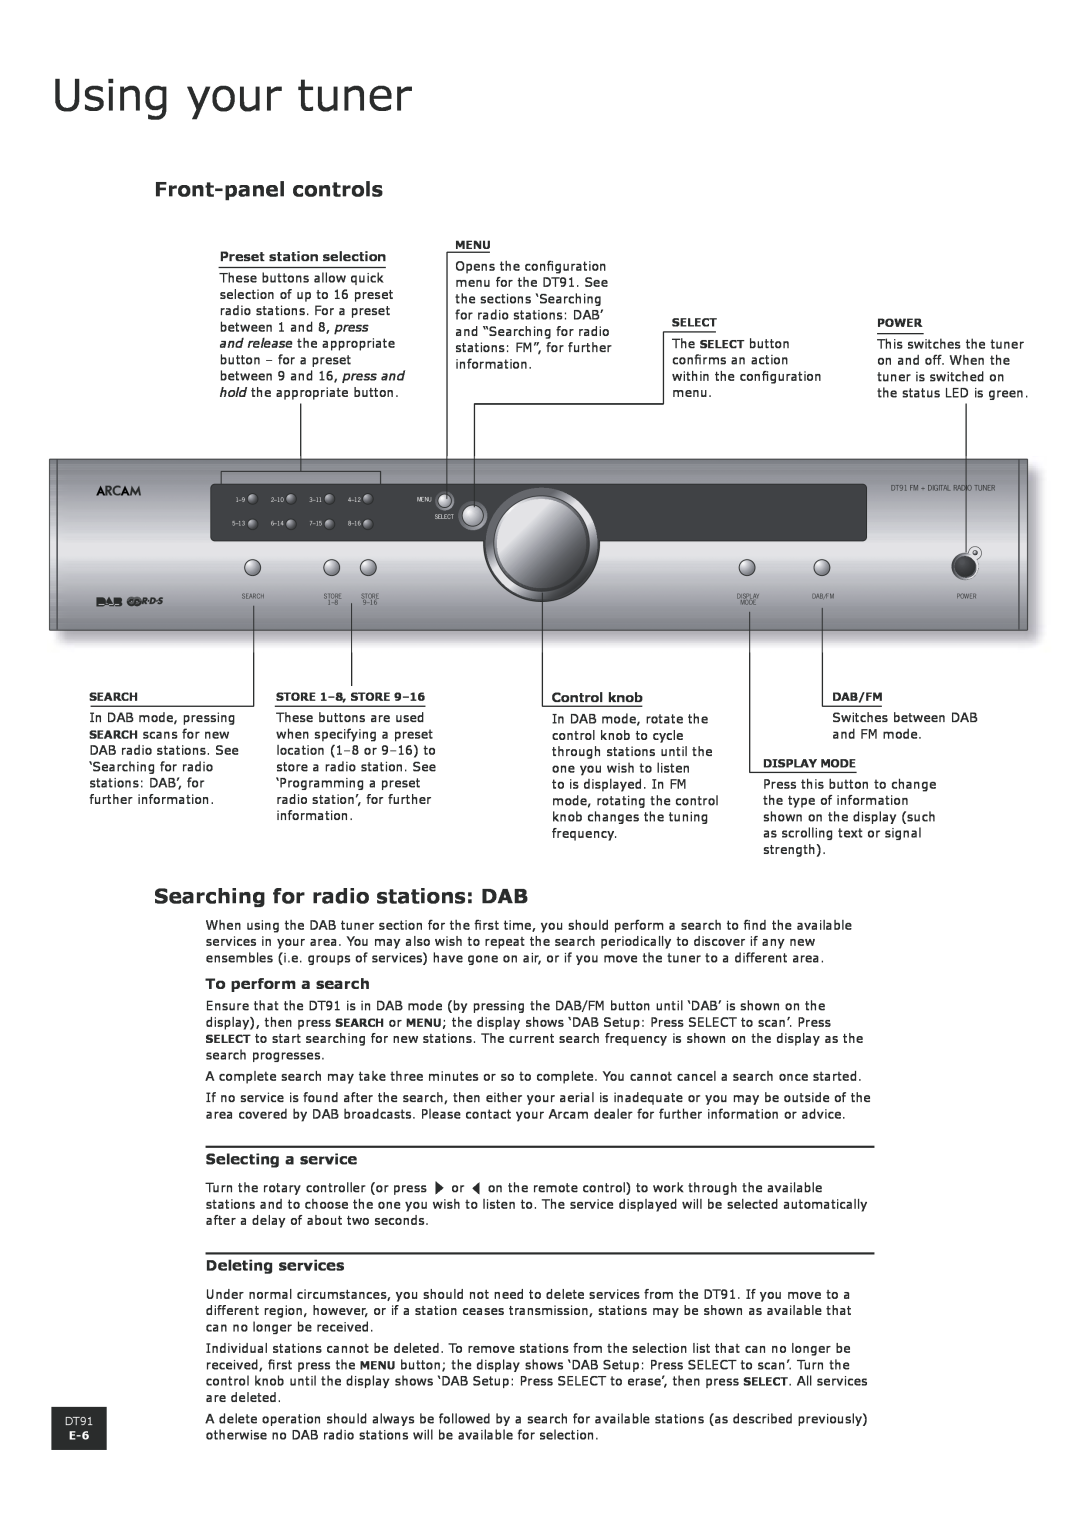 Arcam DT91 Using your tuner, Front-panelcontrols, Searching for radio stations DAB, Preset station selection, Control knob 